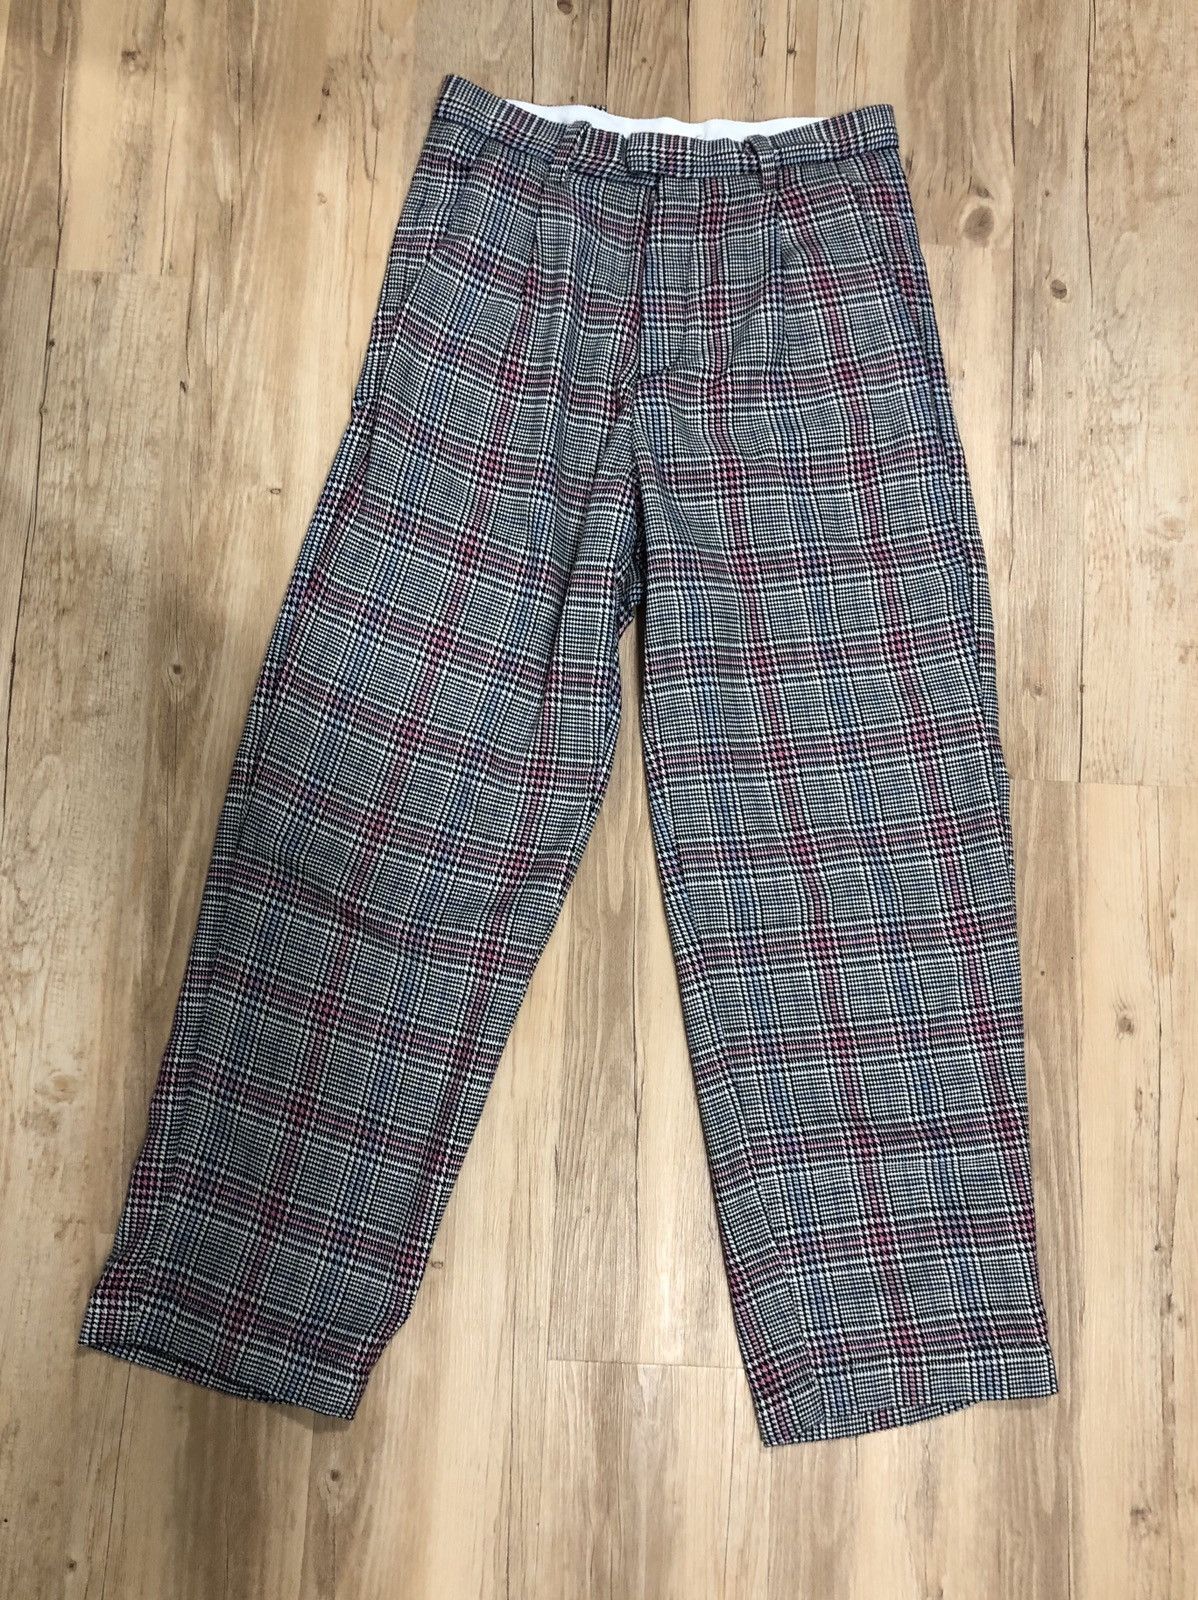 Bare Knuckles Bare knuckles Plaid Trousers | Grailed